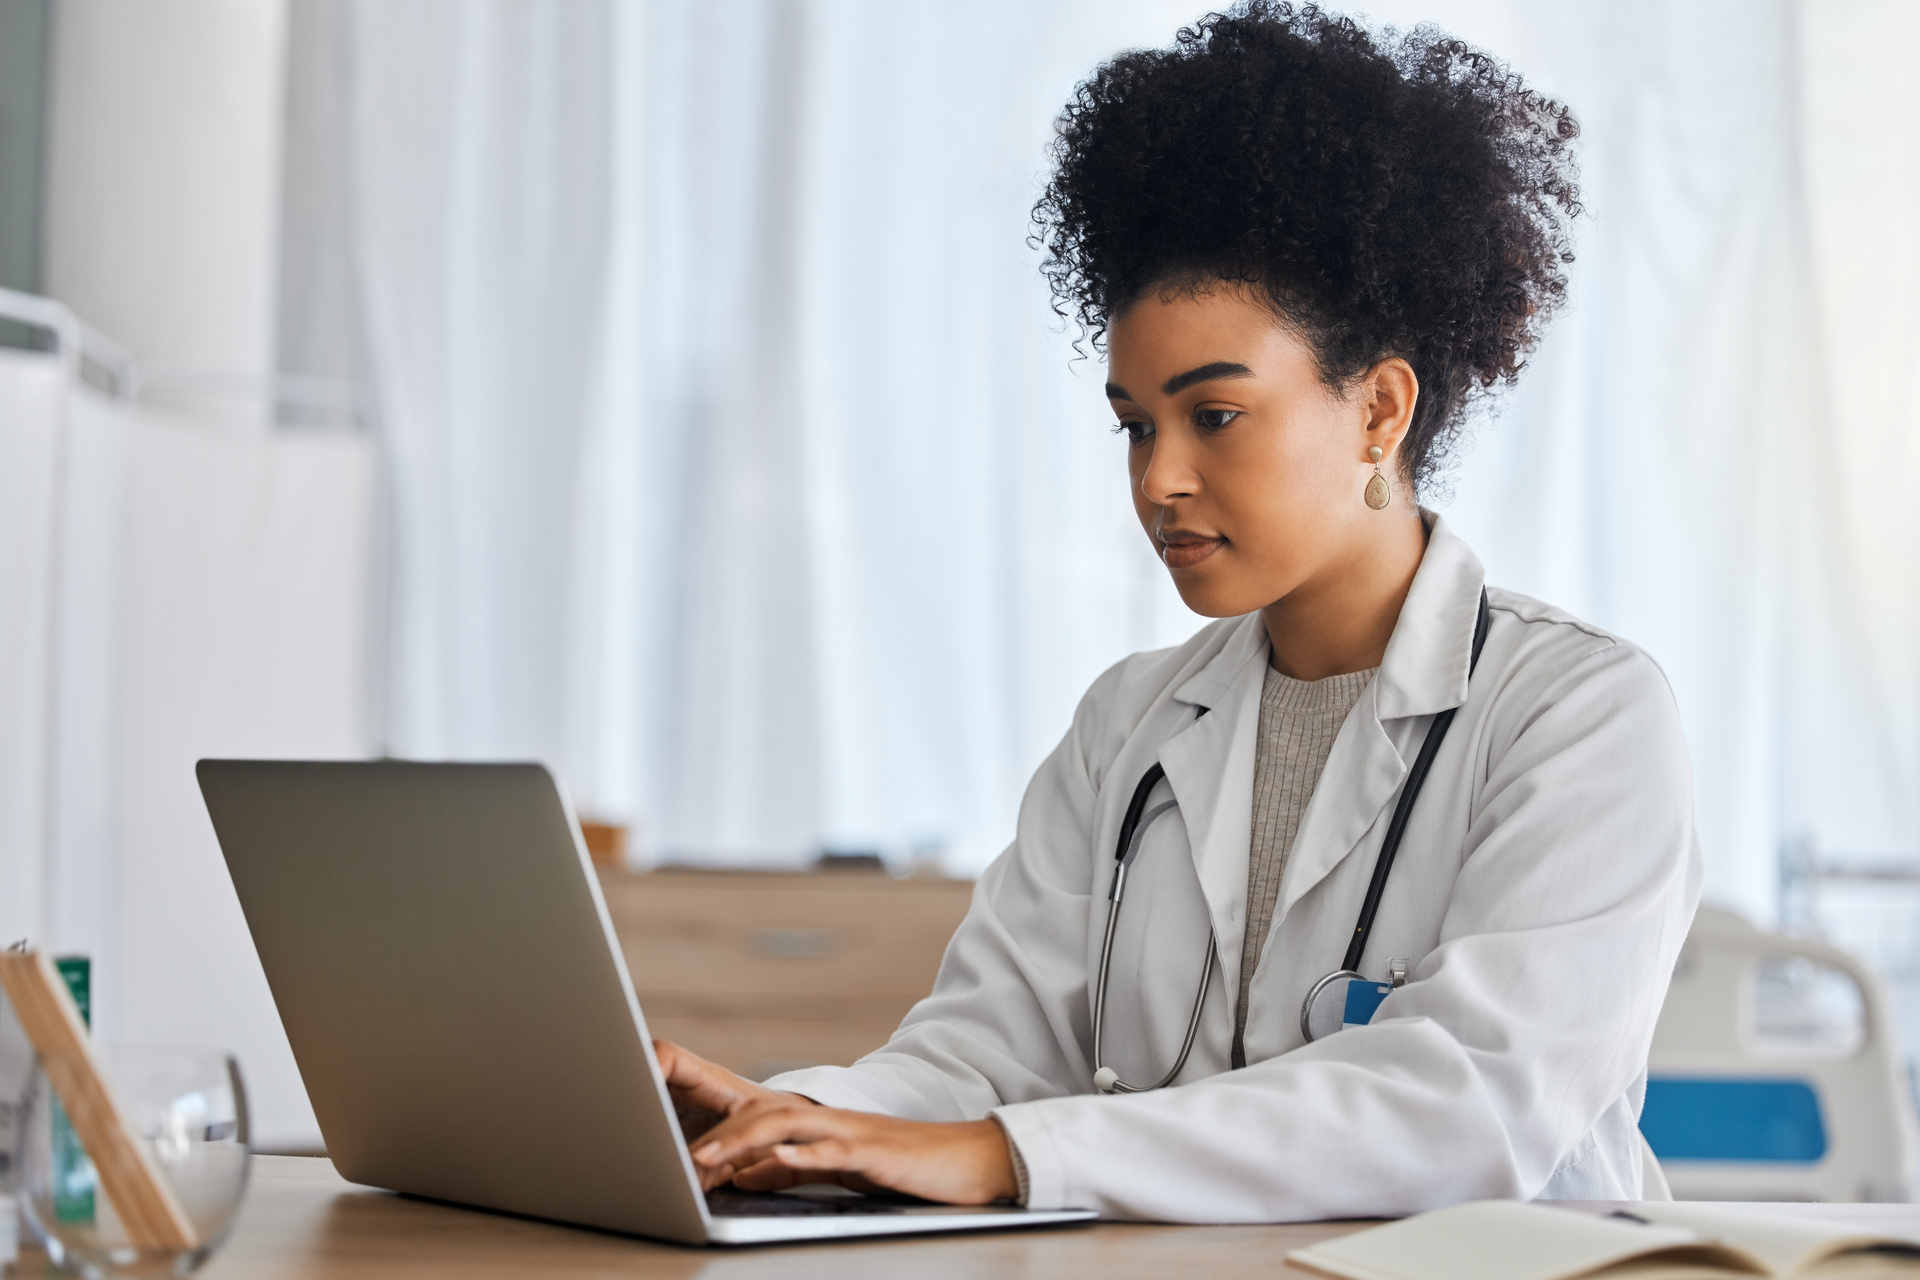 Medical professional using laptop to conduct research